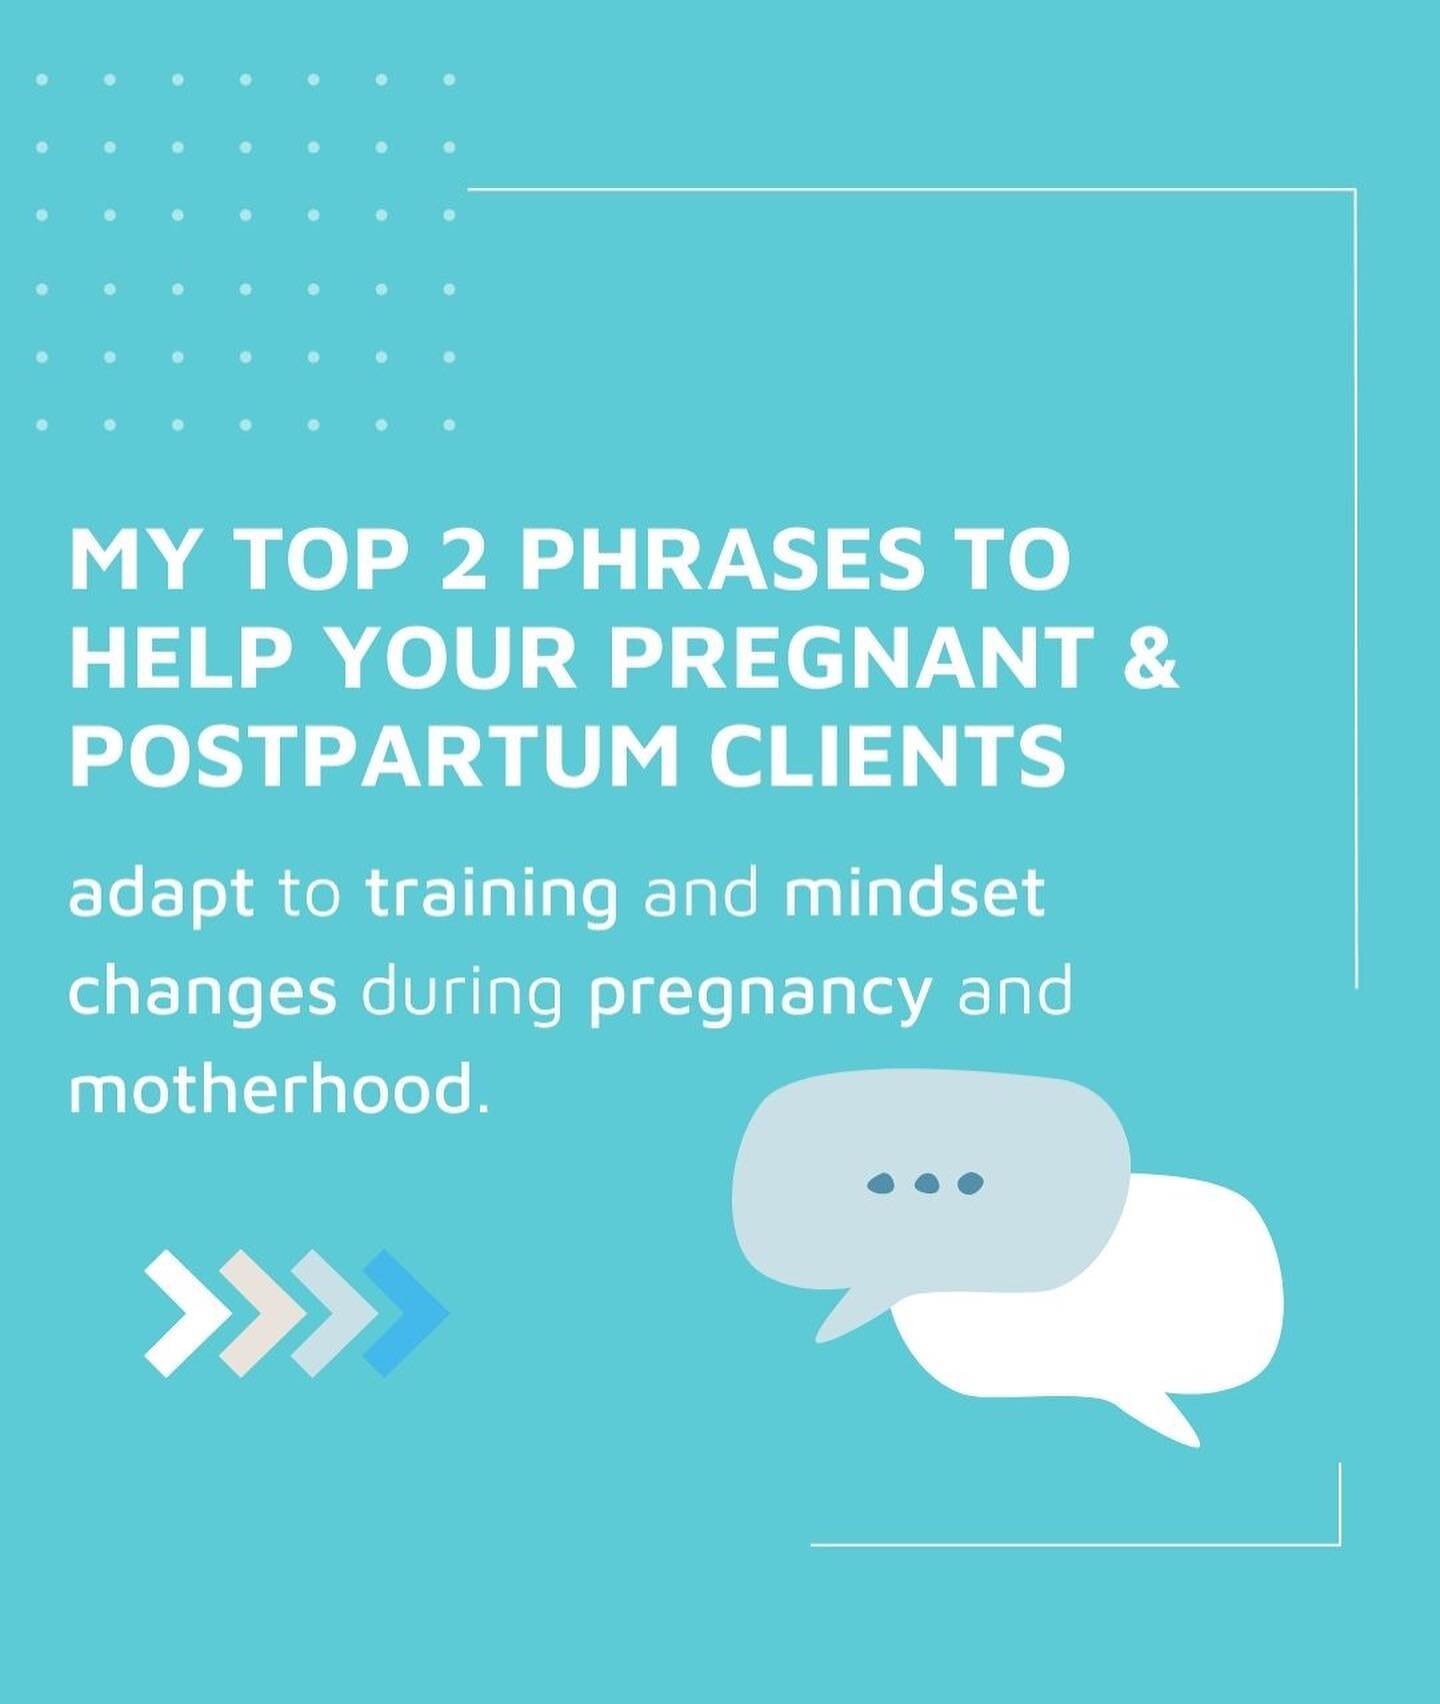 &bull; TOP 2 PHRASES &bull;

Here are my 2 favourite phrases for women who are pregnant or into their postpartum journey. 

It can be tough adapting training to suit pregnancy and return to exercise journeys. We must consider our clients mindset when